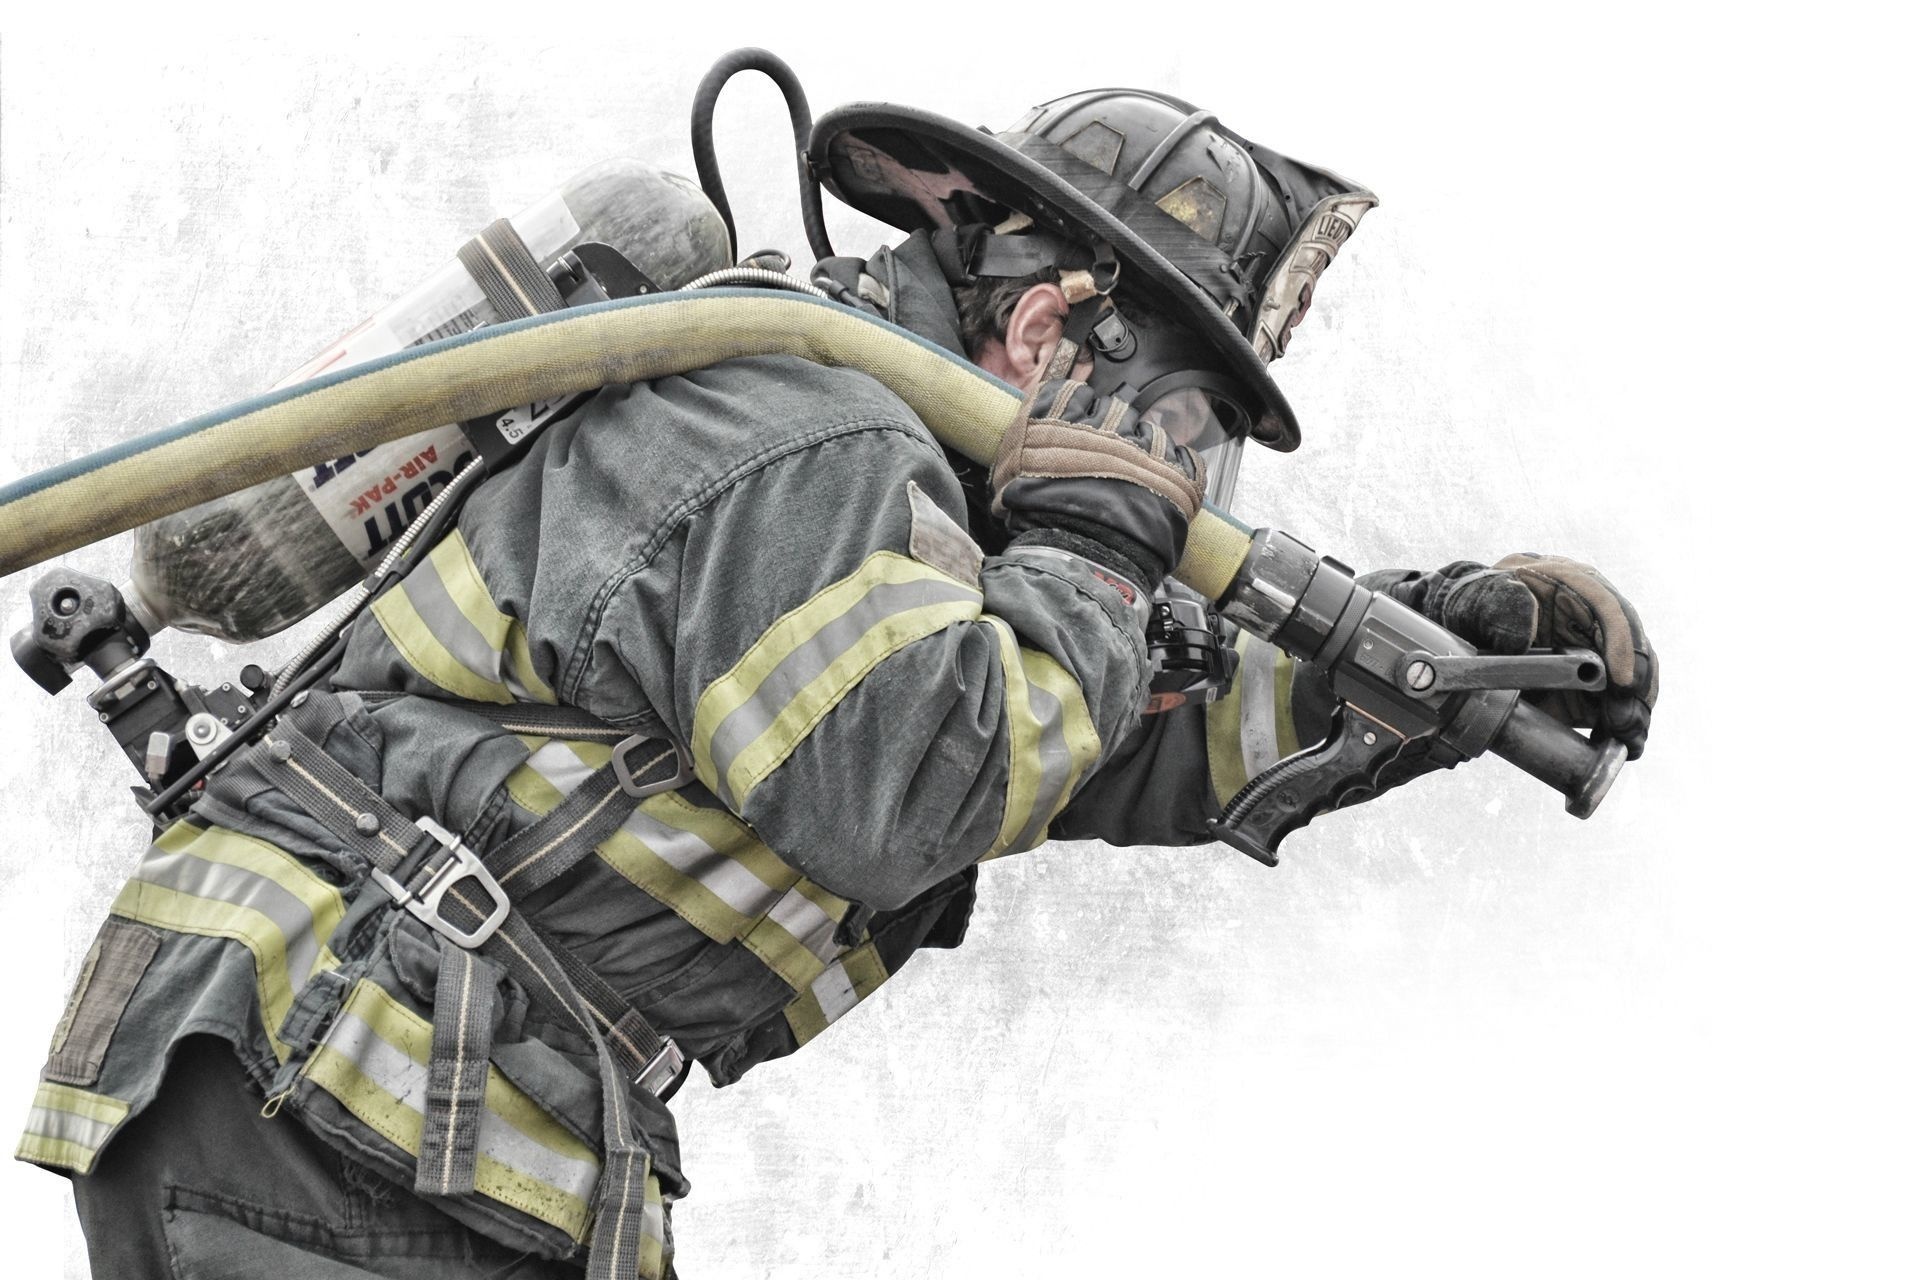 Fireman: Firefighting, A dangerous profession due to the toxic environment created by combustible material. 1920x1280 HD Wallpaper.